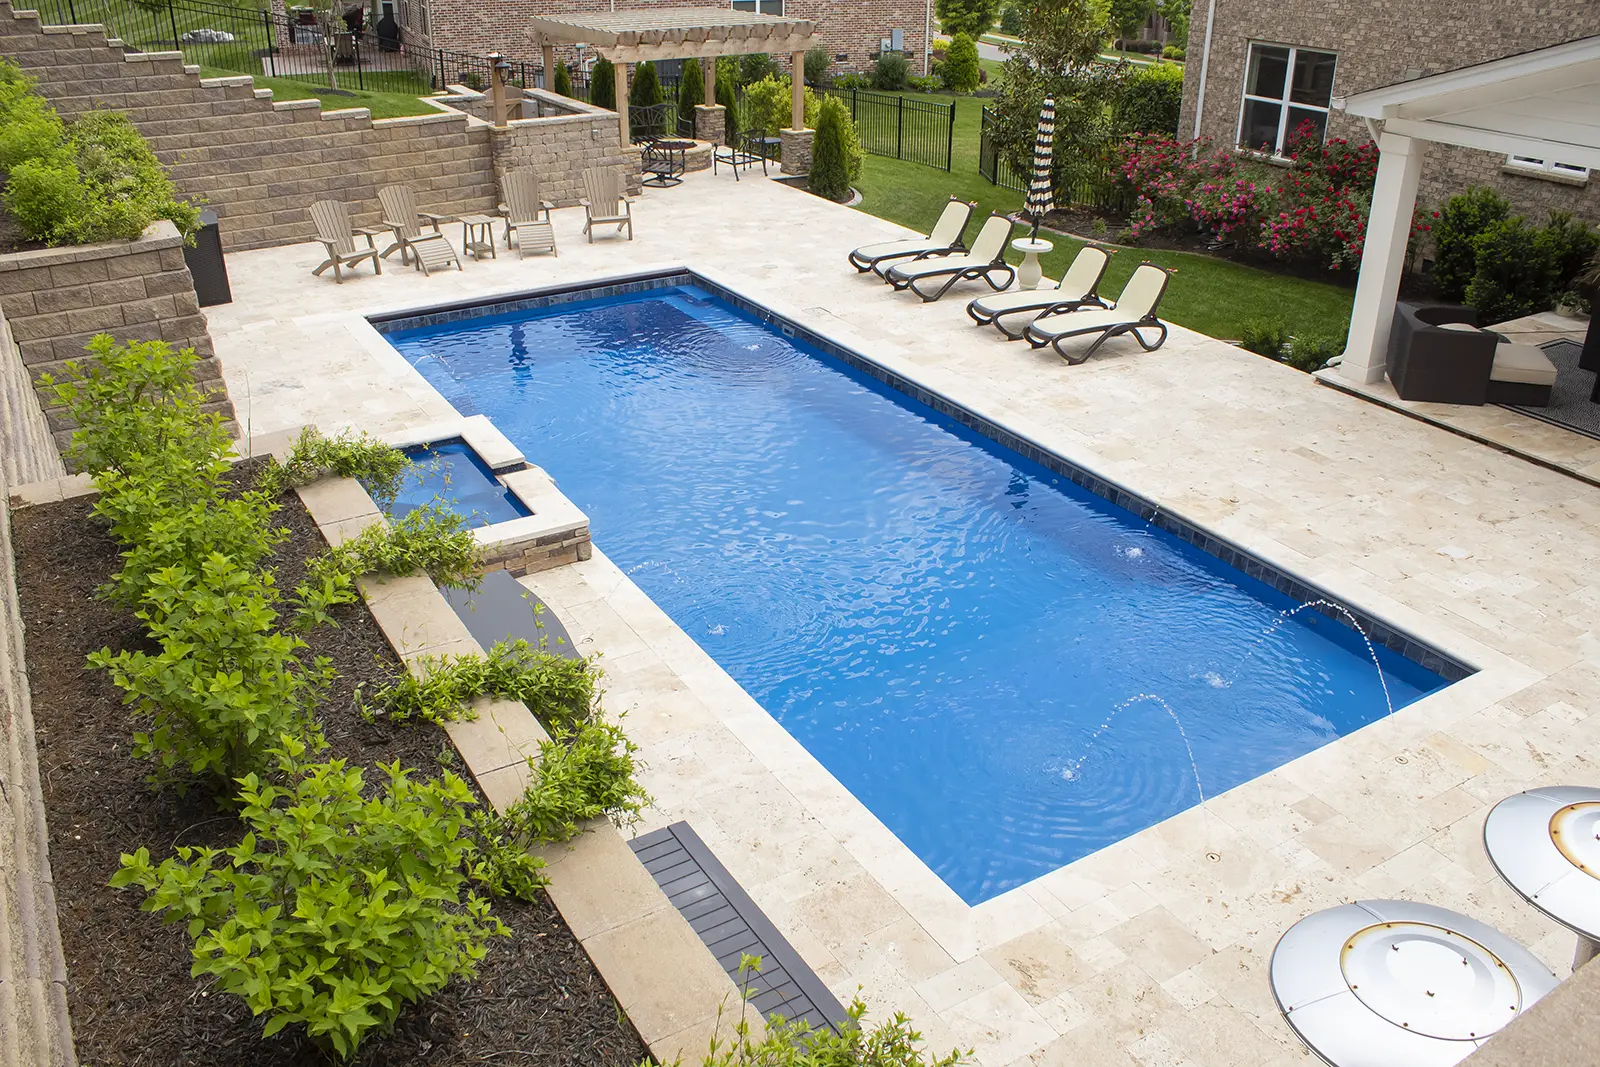 The Leisure Pools Pinnacle™ - let us install your pool in central Illinois